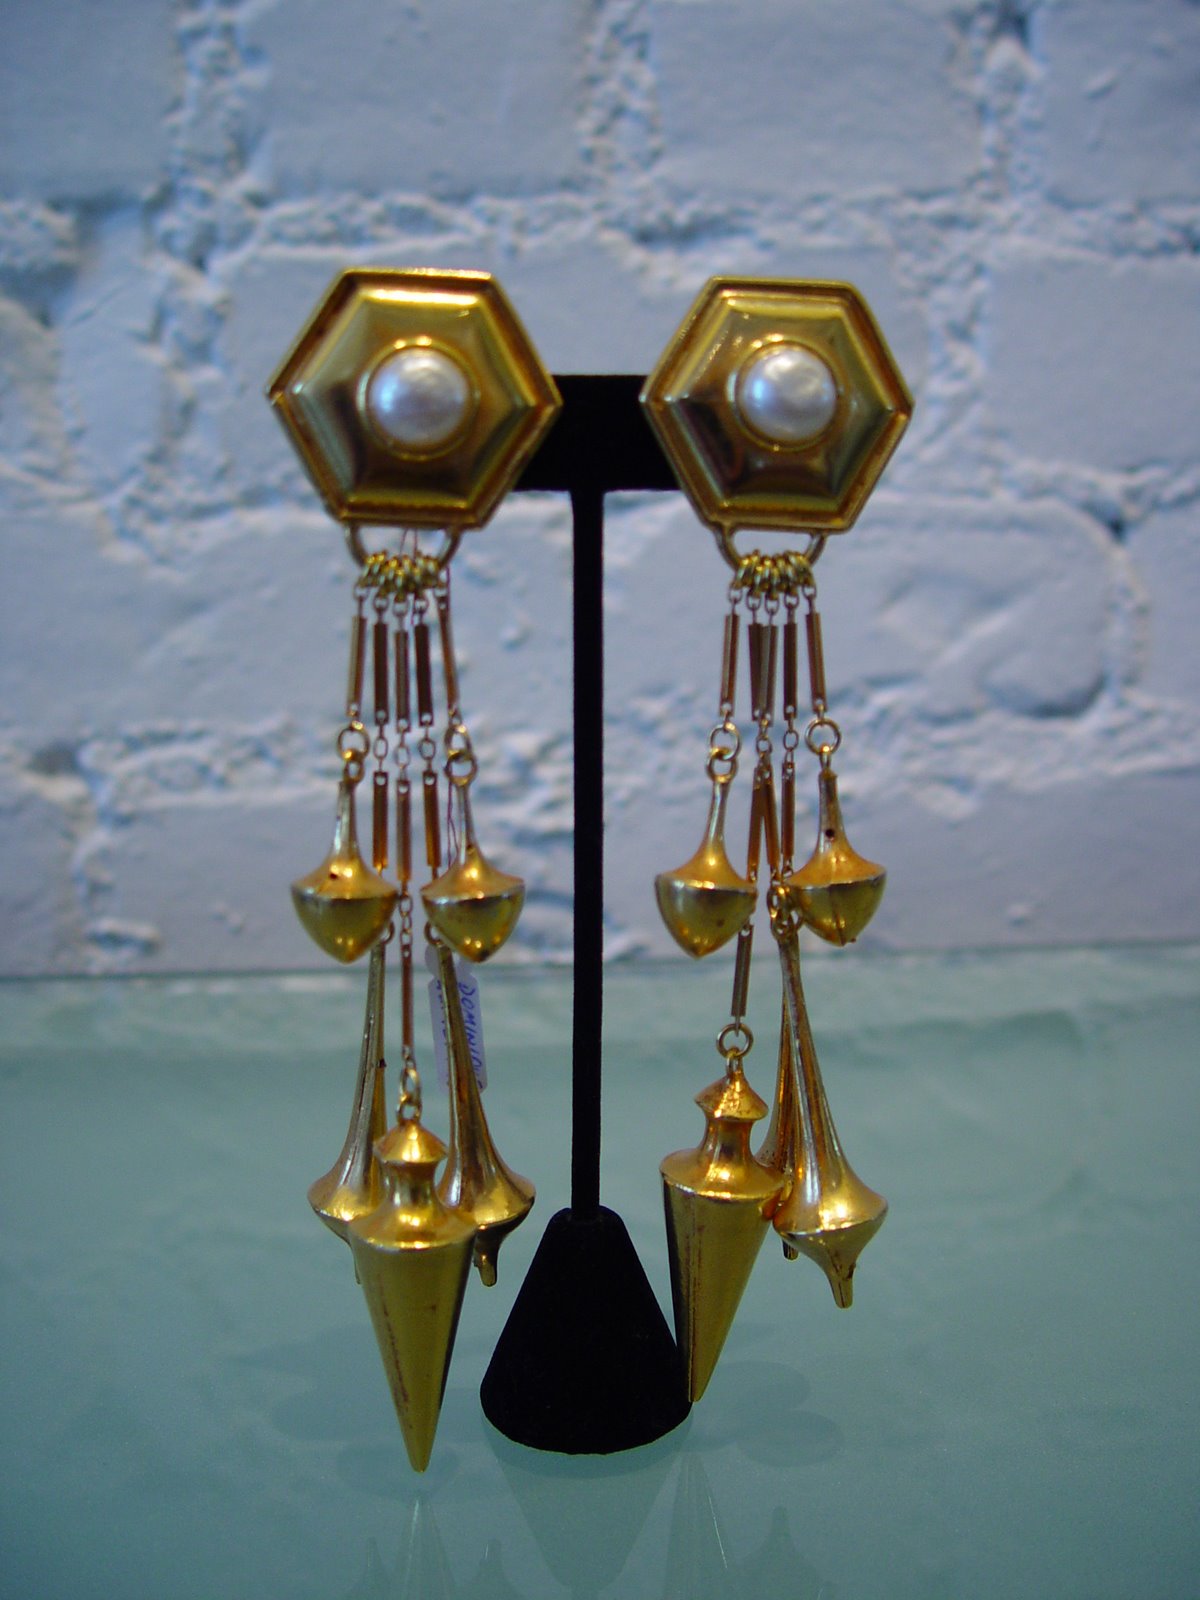 [DOMINIQUE+AURIENTIS+GOLD+METAL+EARRINGS+WITH+PEARL+AND+LARGE+CONE+SHAPED+DROPS+C+80S.JPG.JPG]